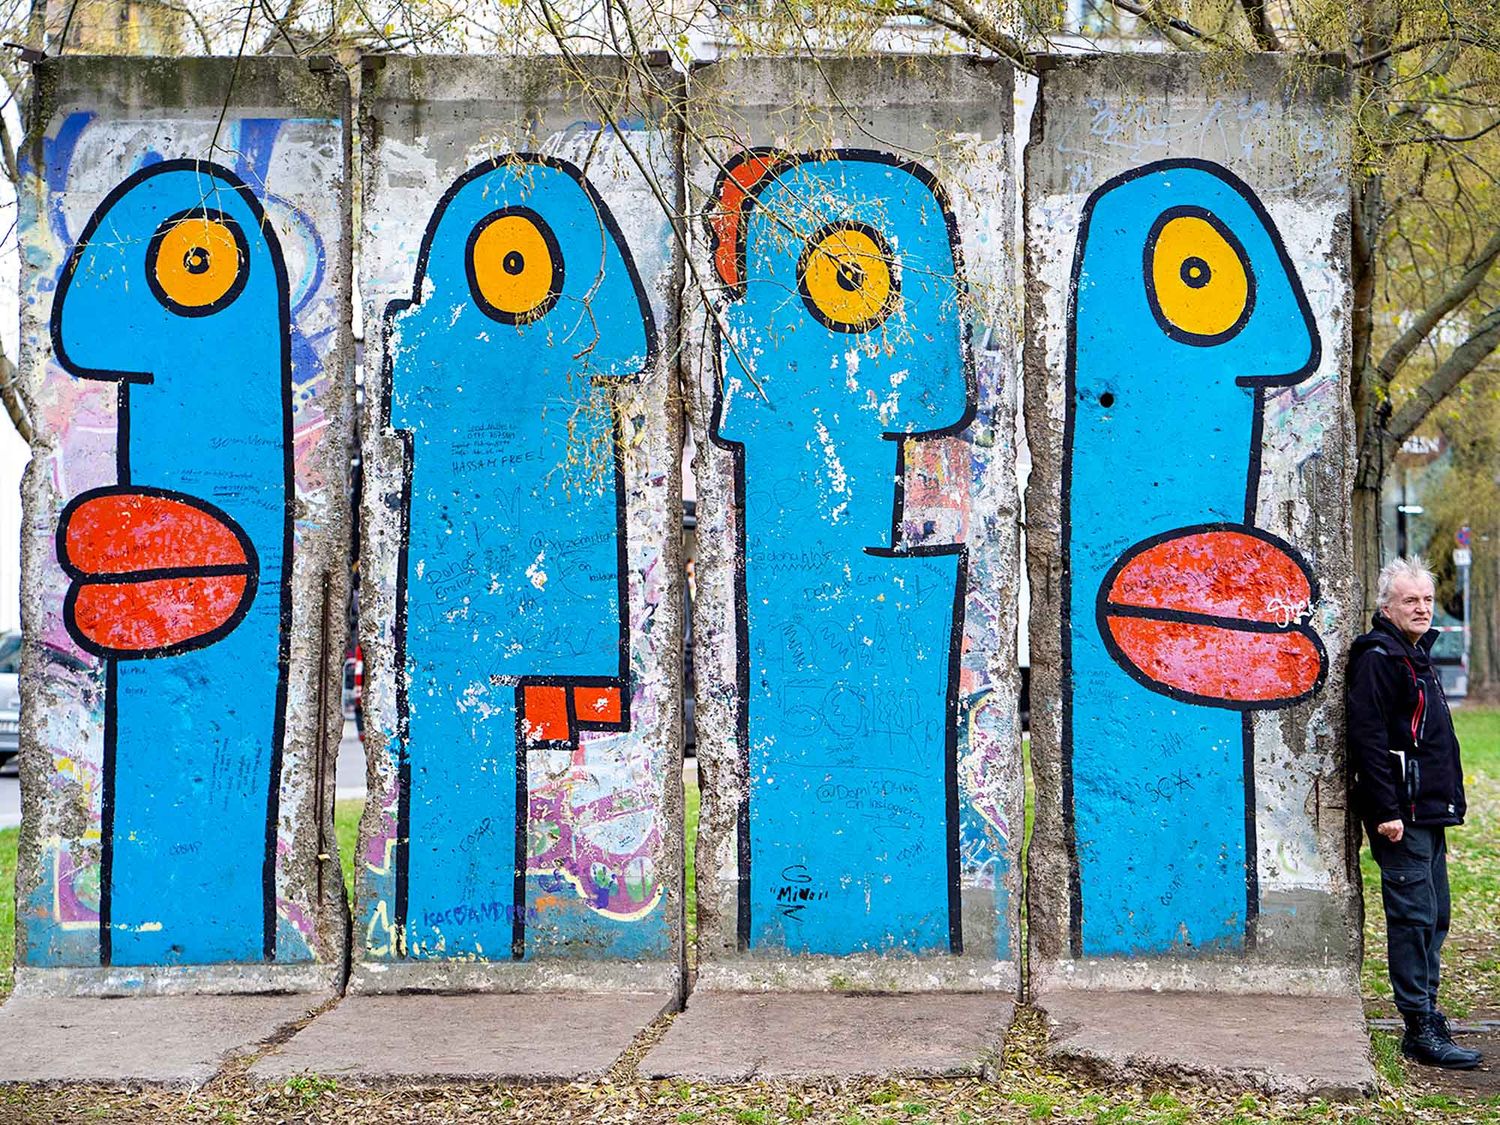 The fall of the Berlin Wall in 1989 marked the end of an era but also the creation of an artistic place with the East Side Gallery of which Thierry Noir was the first artist to dare to paint the walls.